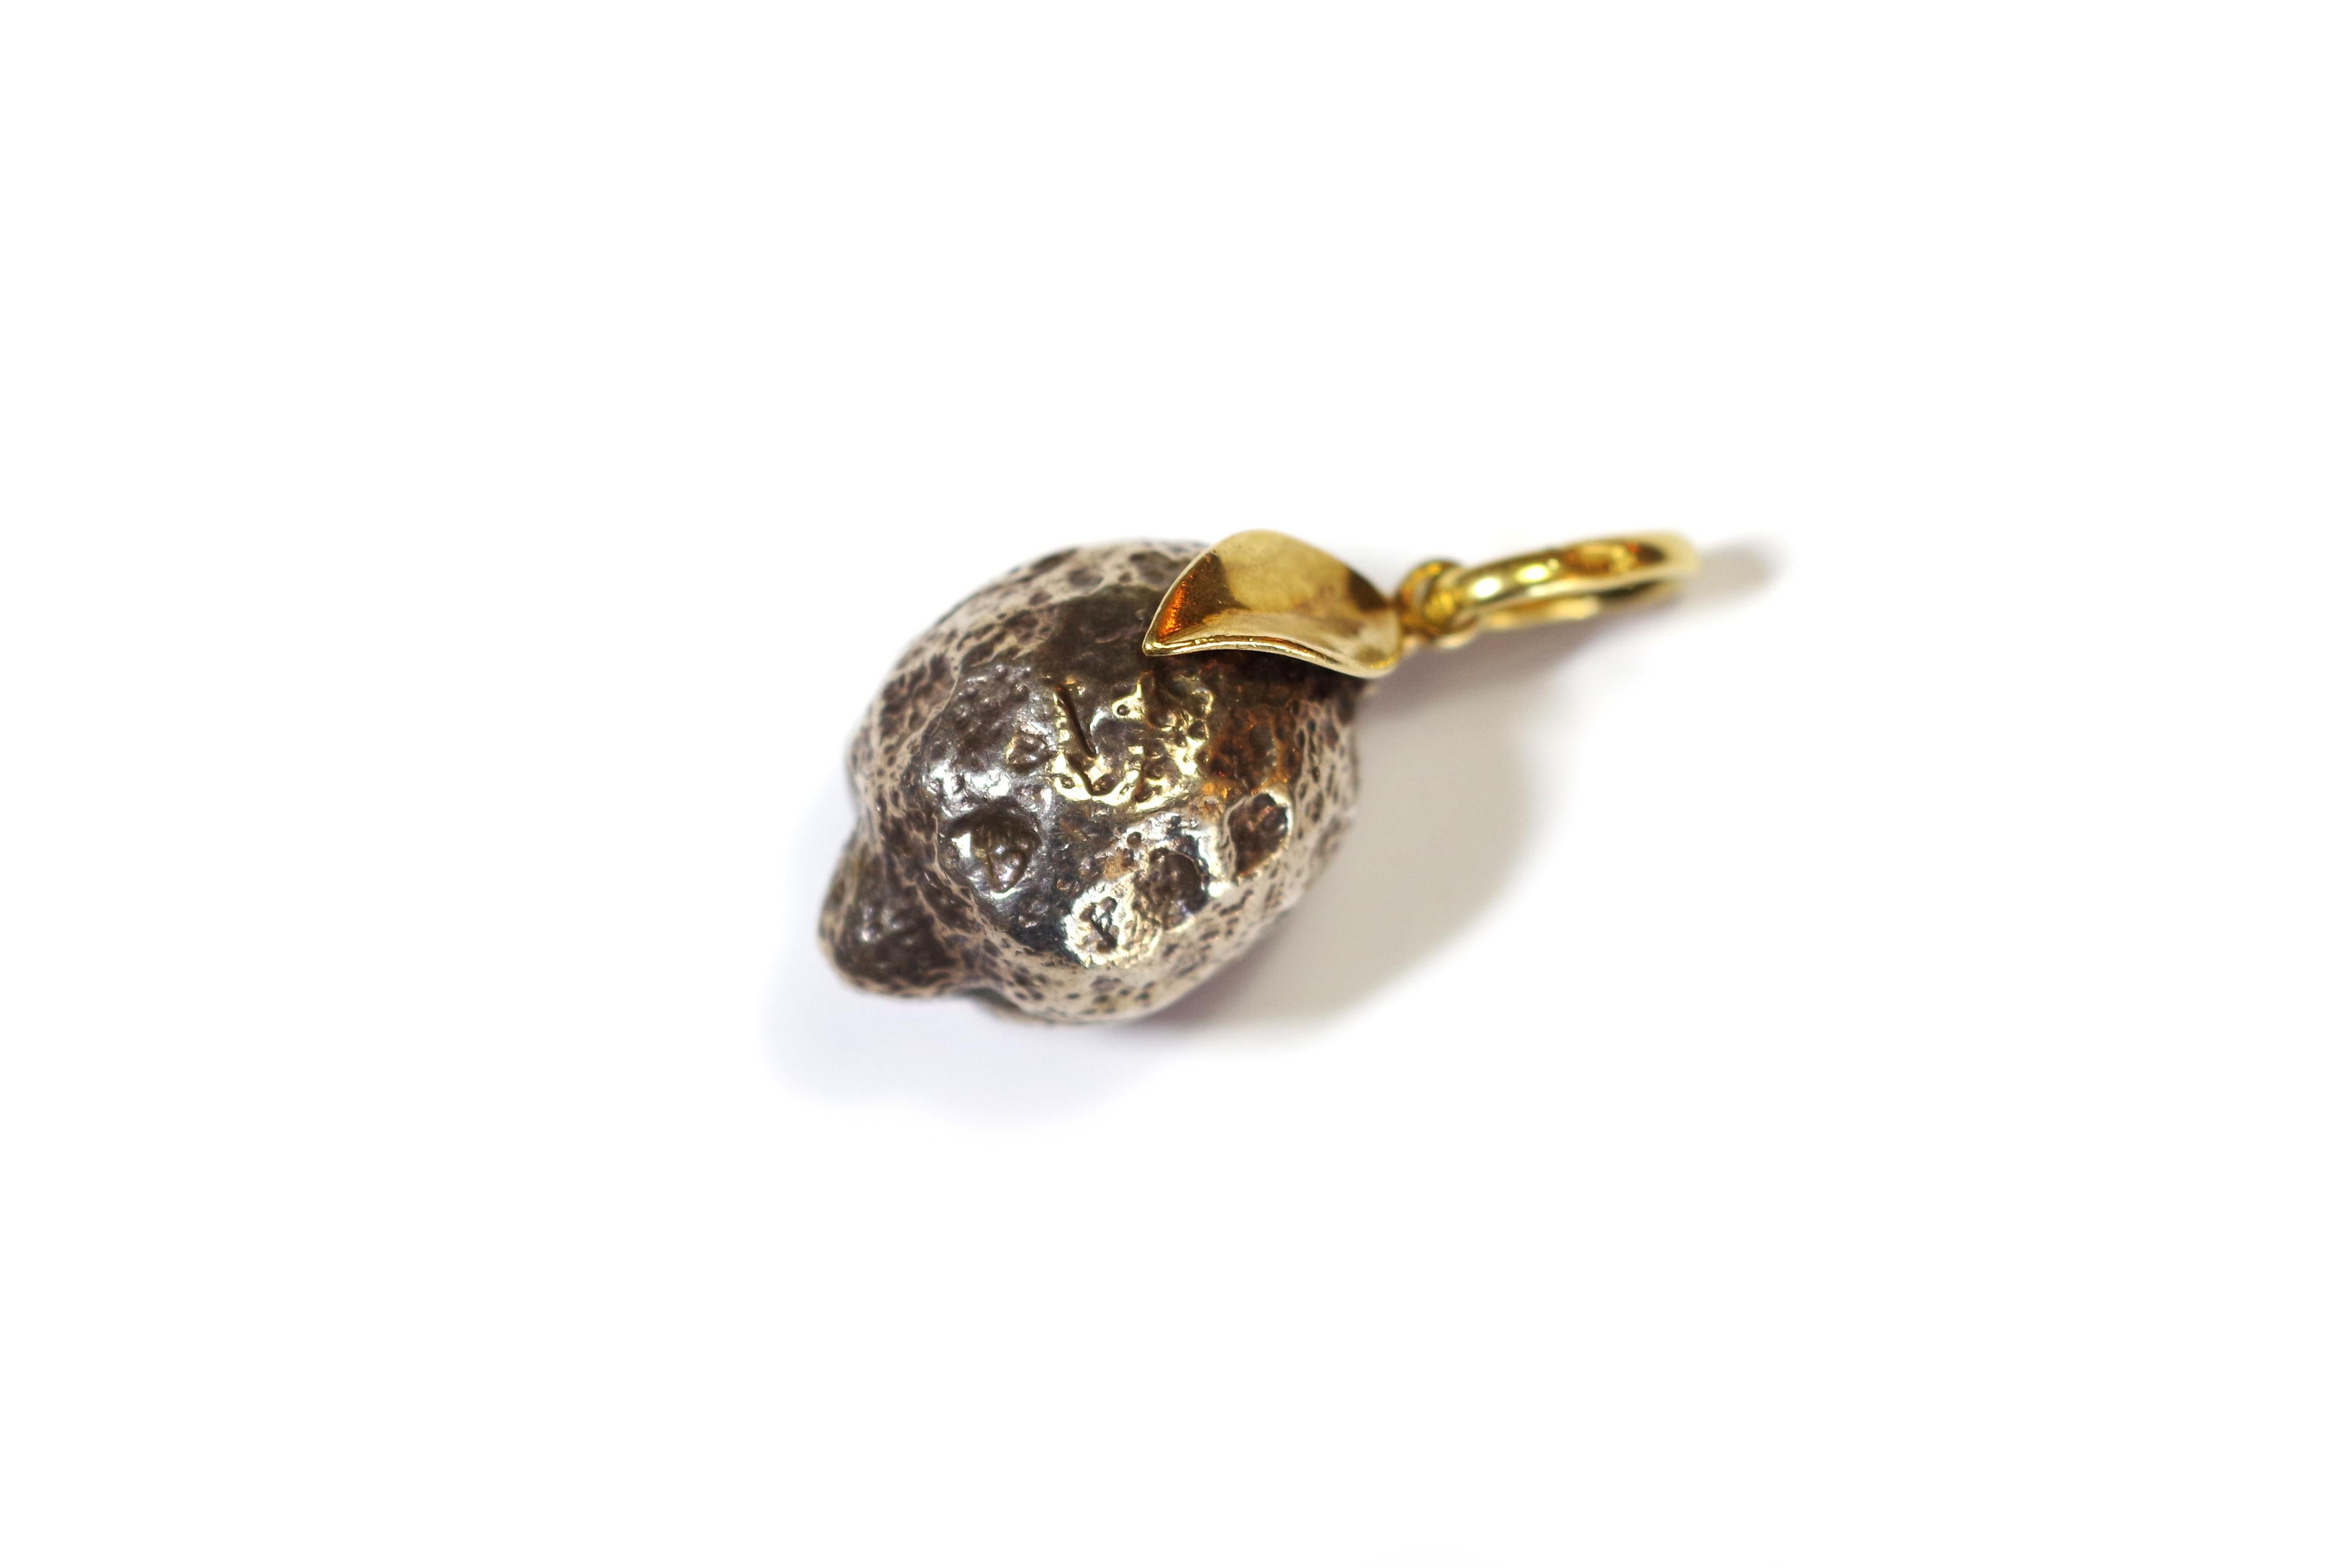 Contemporary Vintage Pomellato lemon pendant in 18 karat gold and silver, signed jewelry